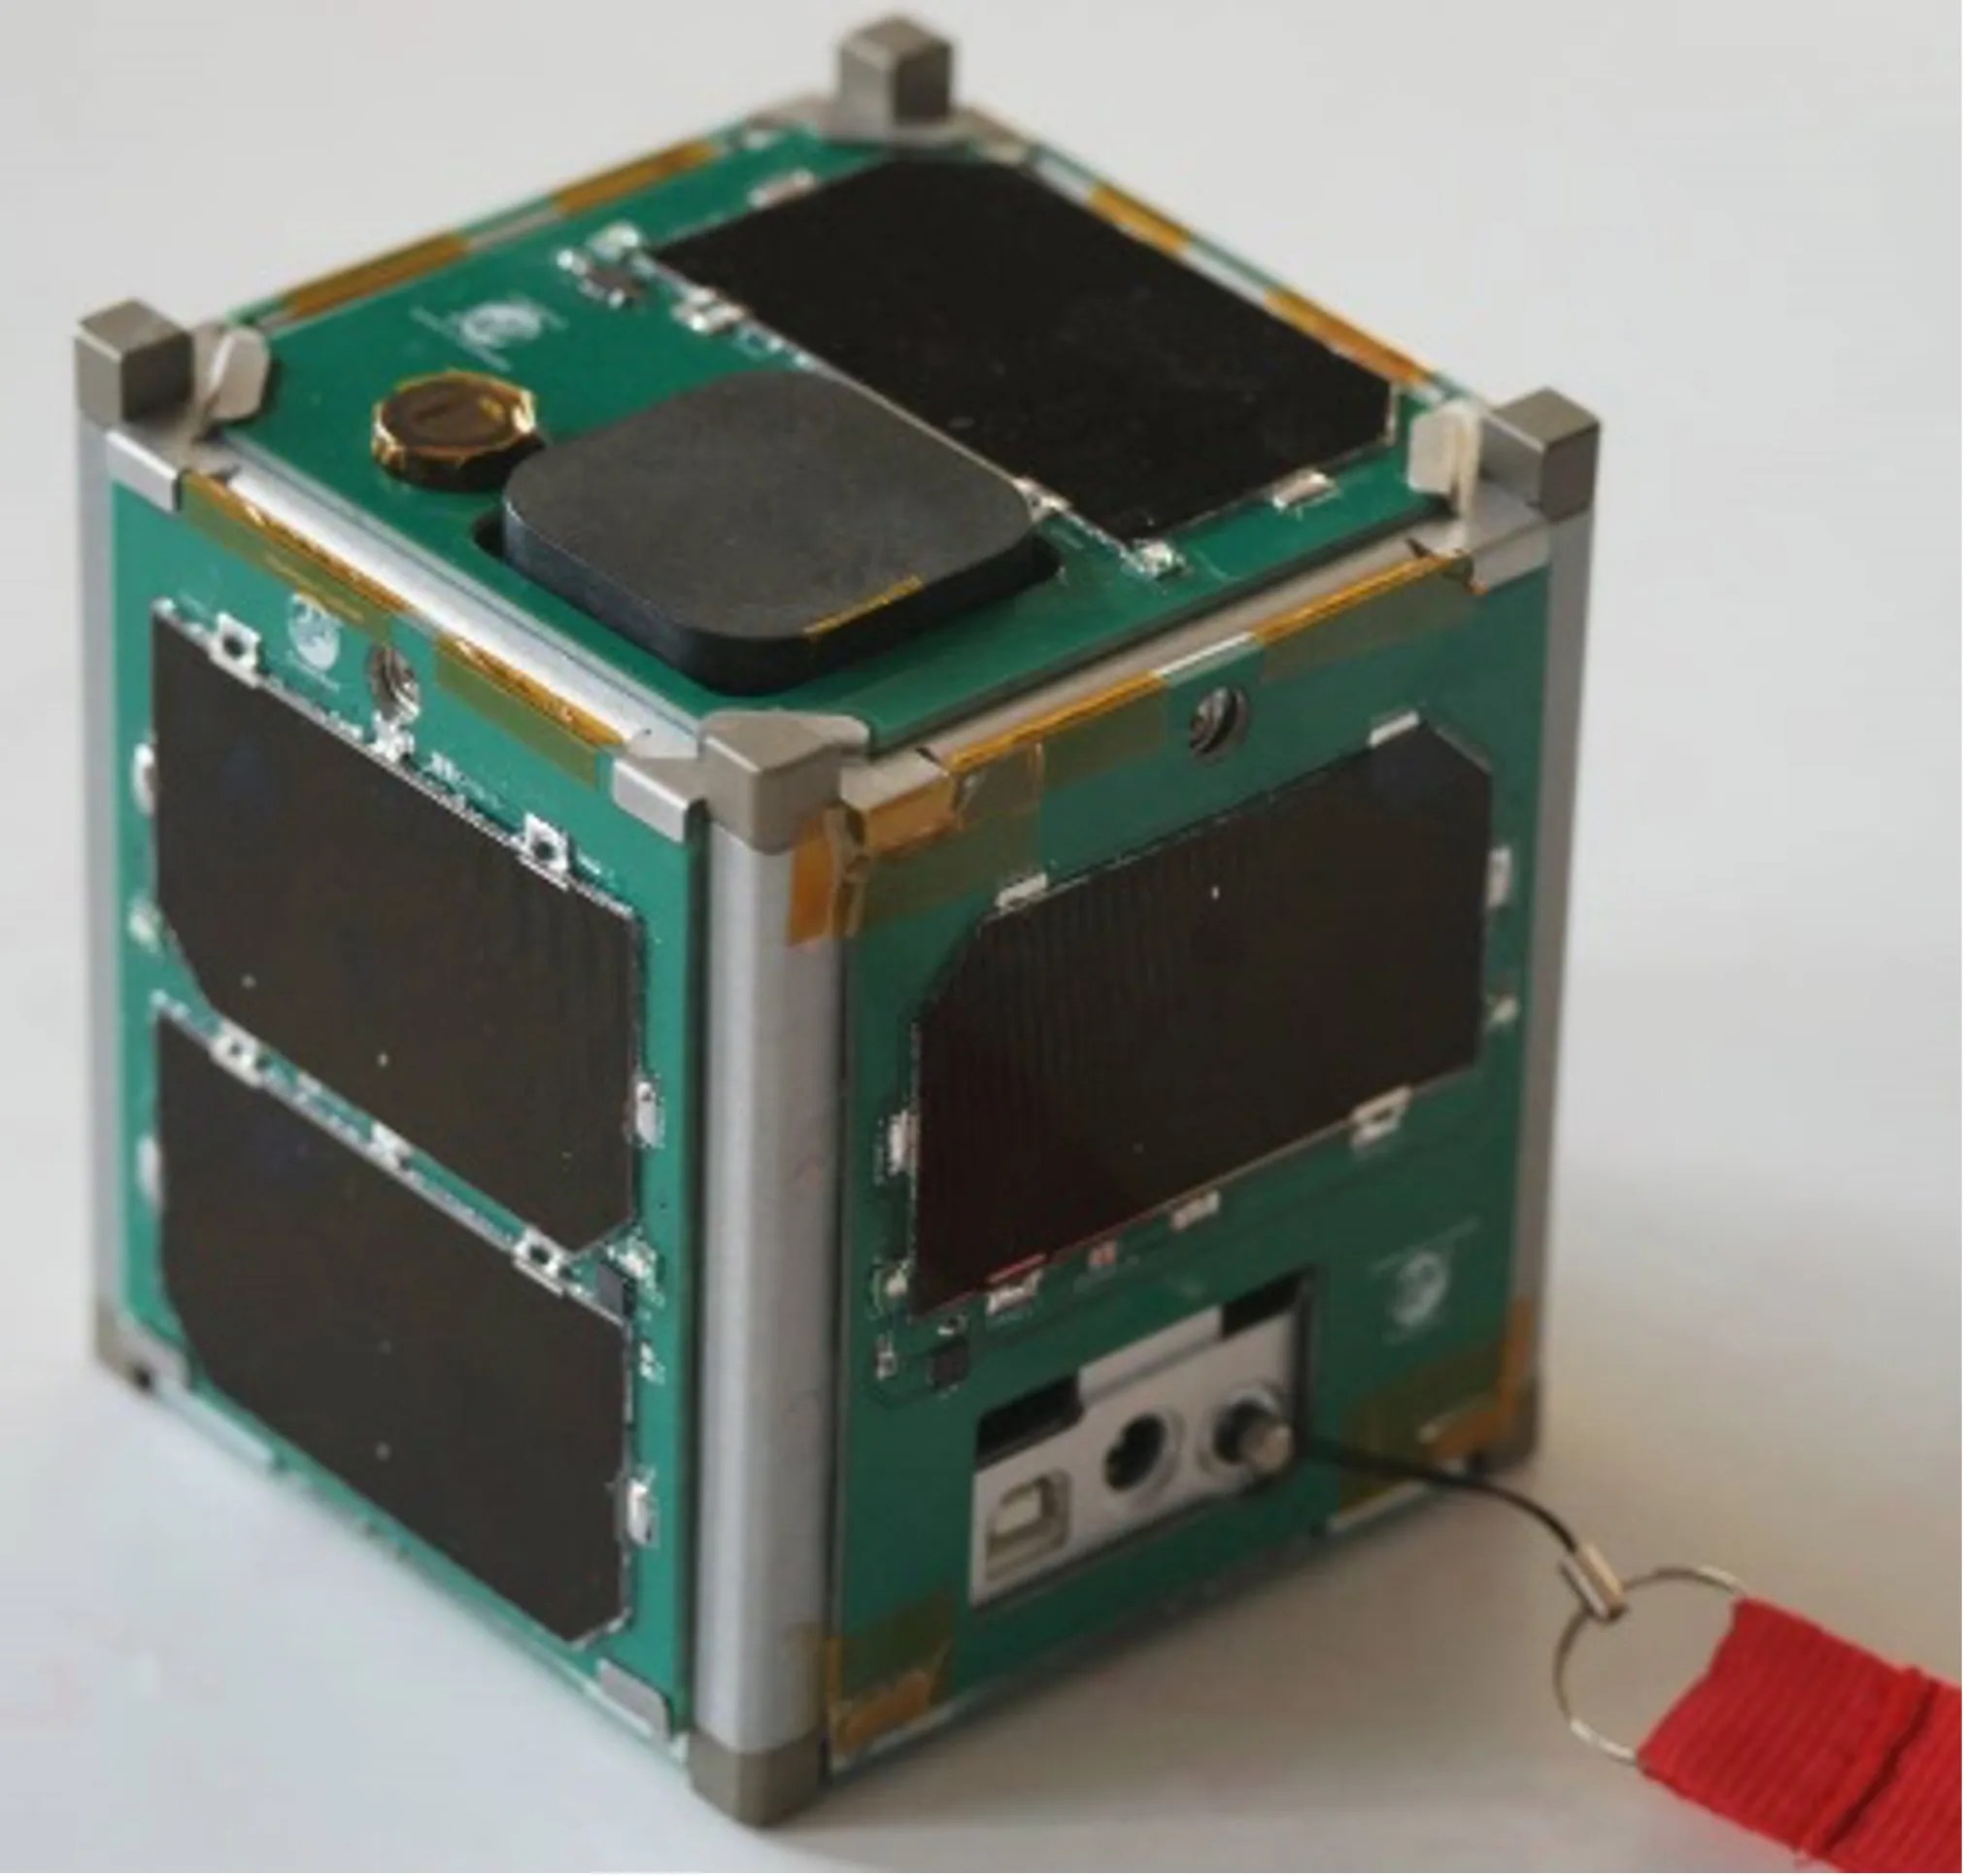 A small, green satellite rests on a white surface. It is in the shape of a cube with black rectangular panels that cover various spots on the outer surface.